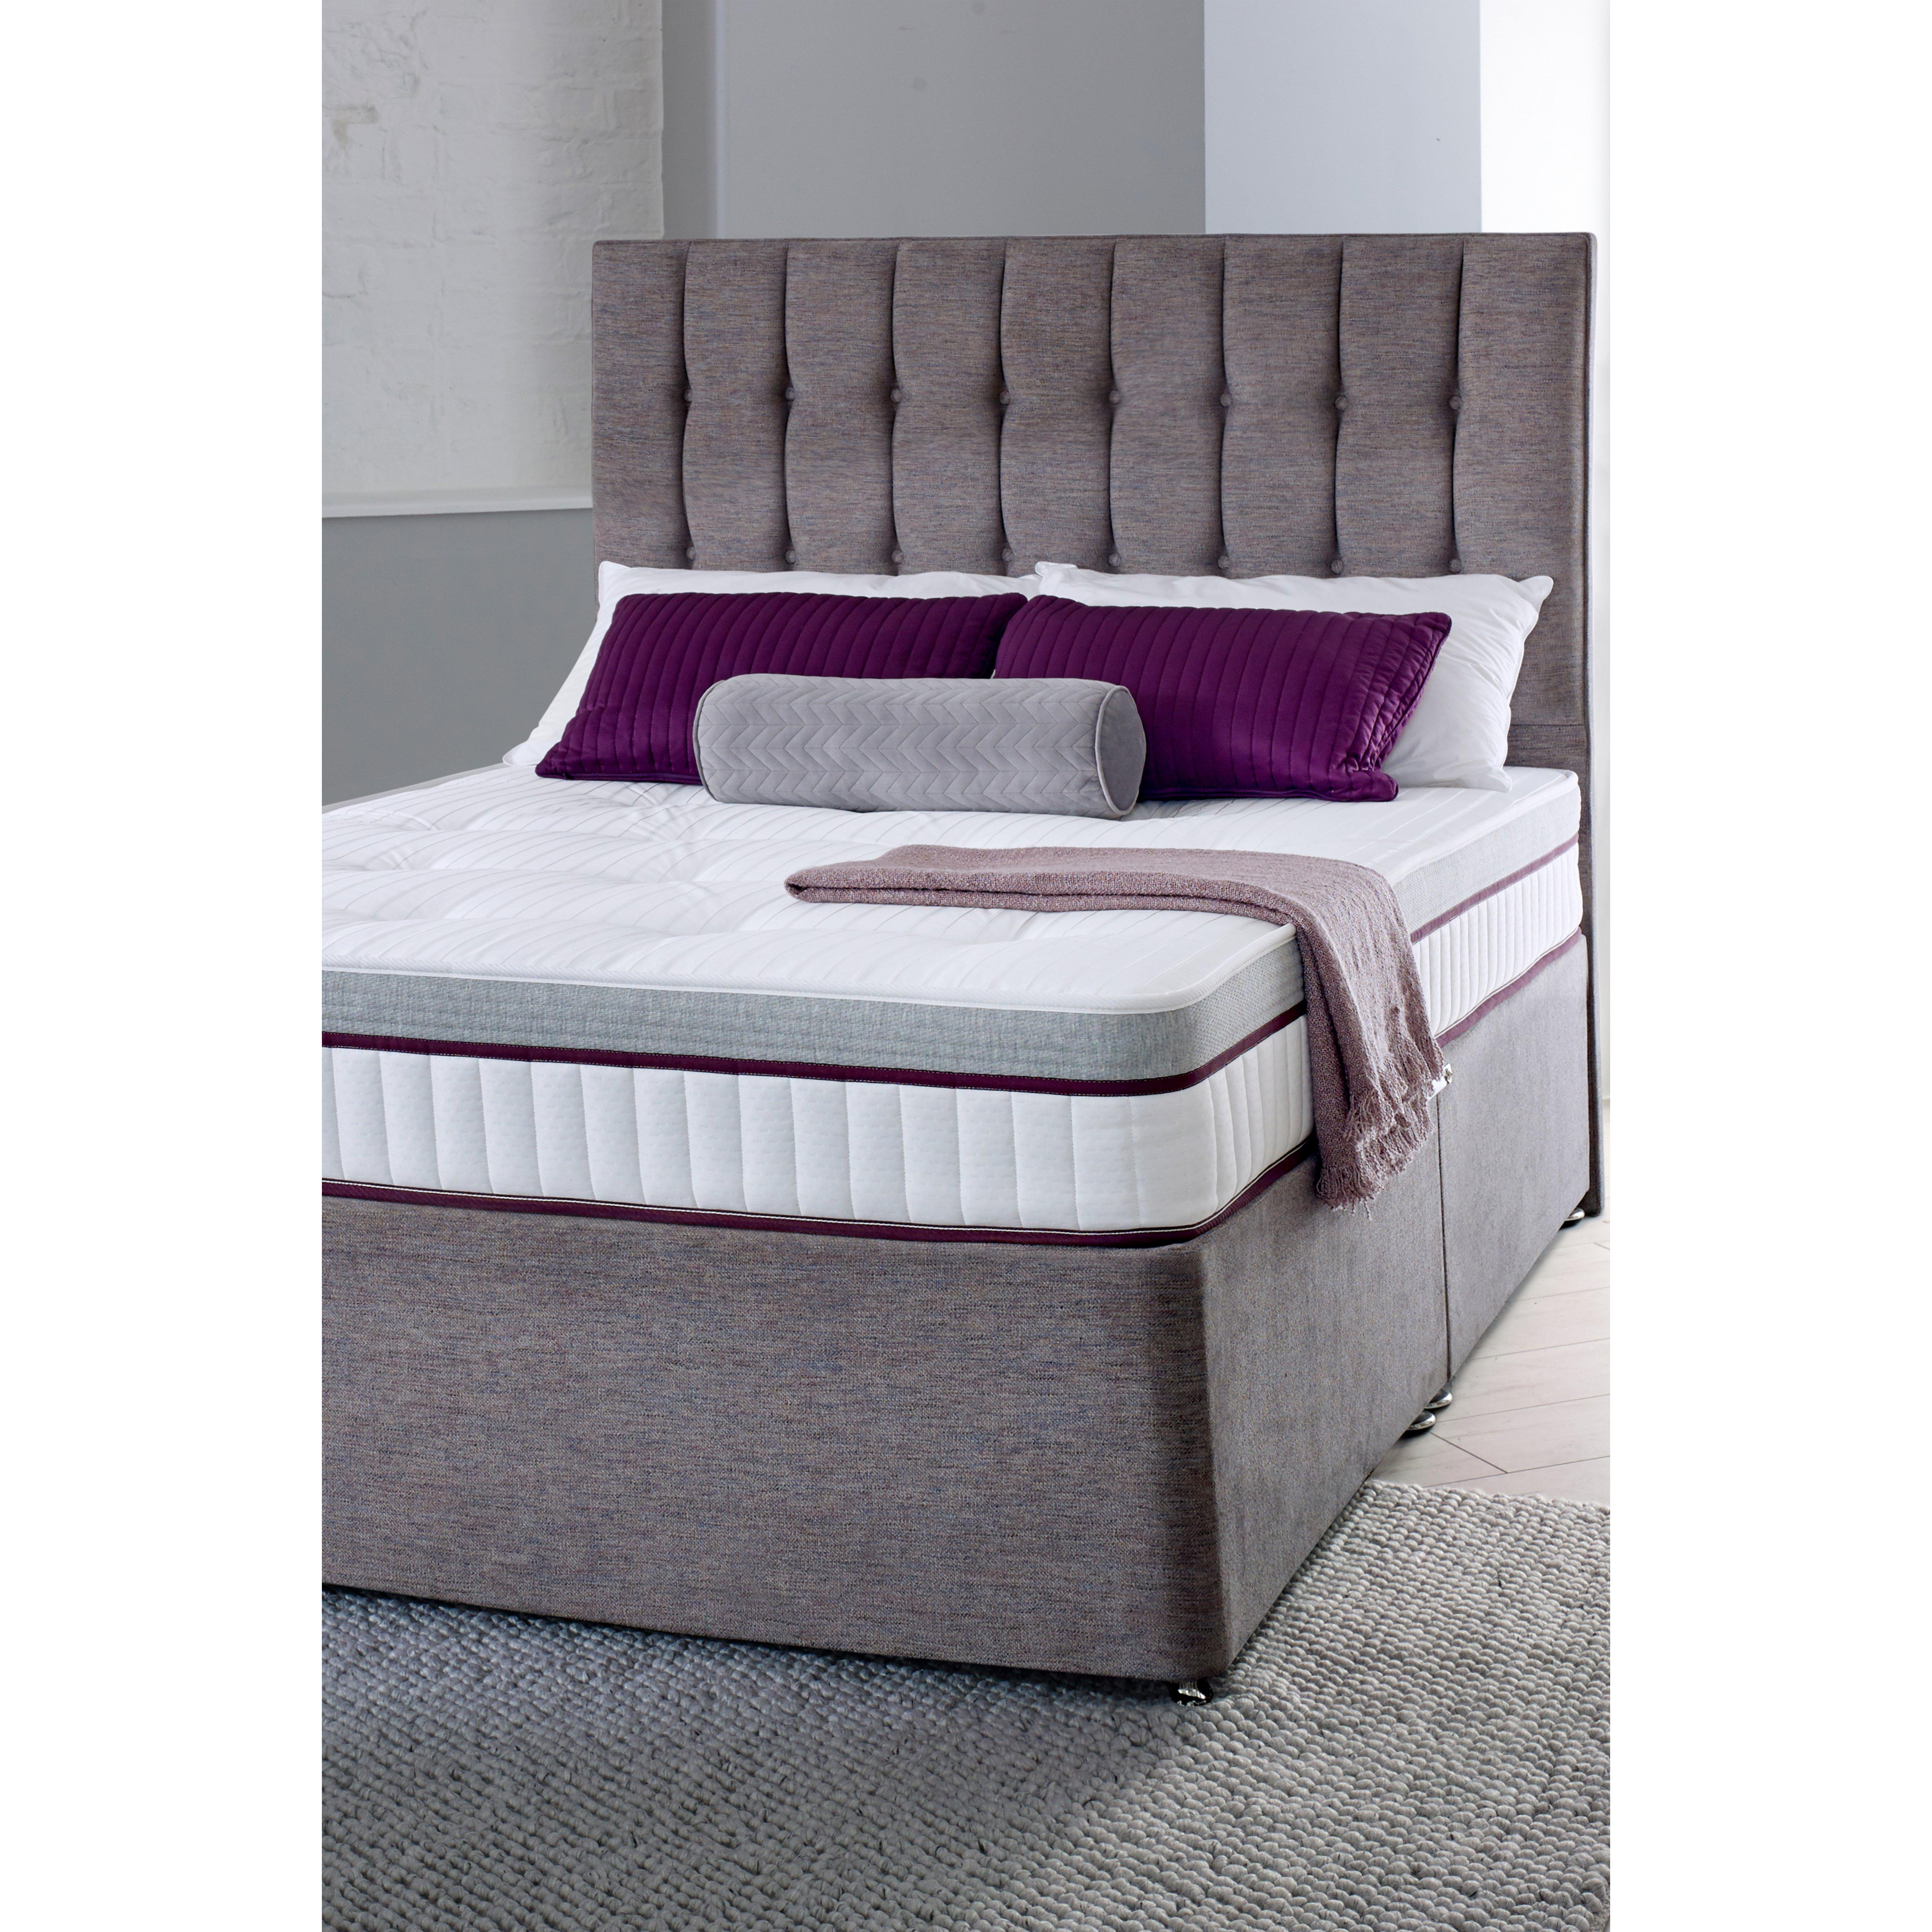 Mode Orthopaedic Support Open Coil Tufted Mattress - image 1